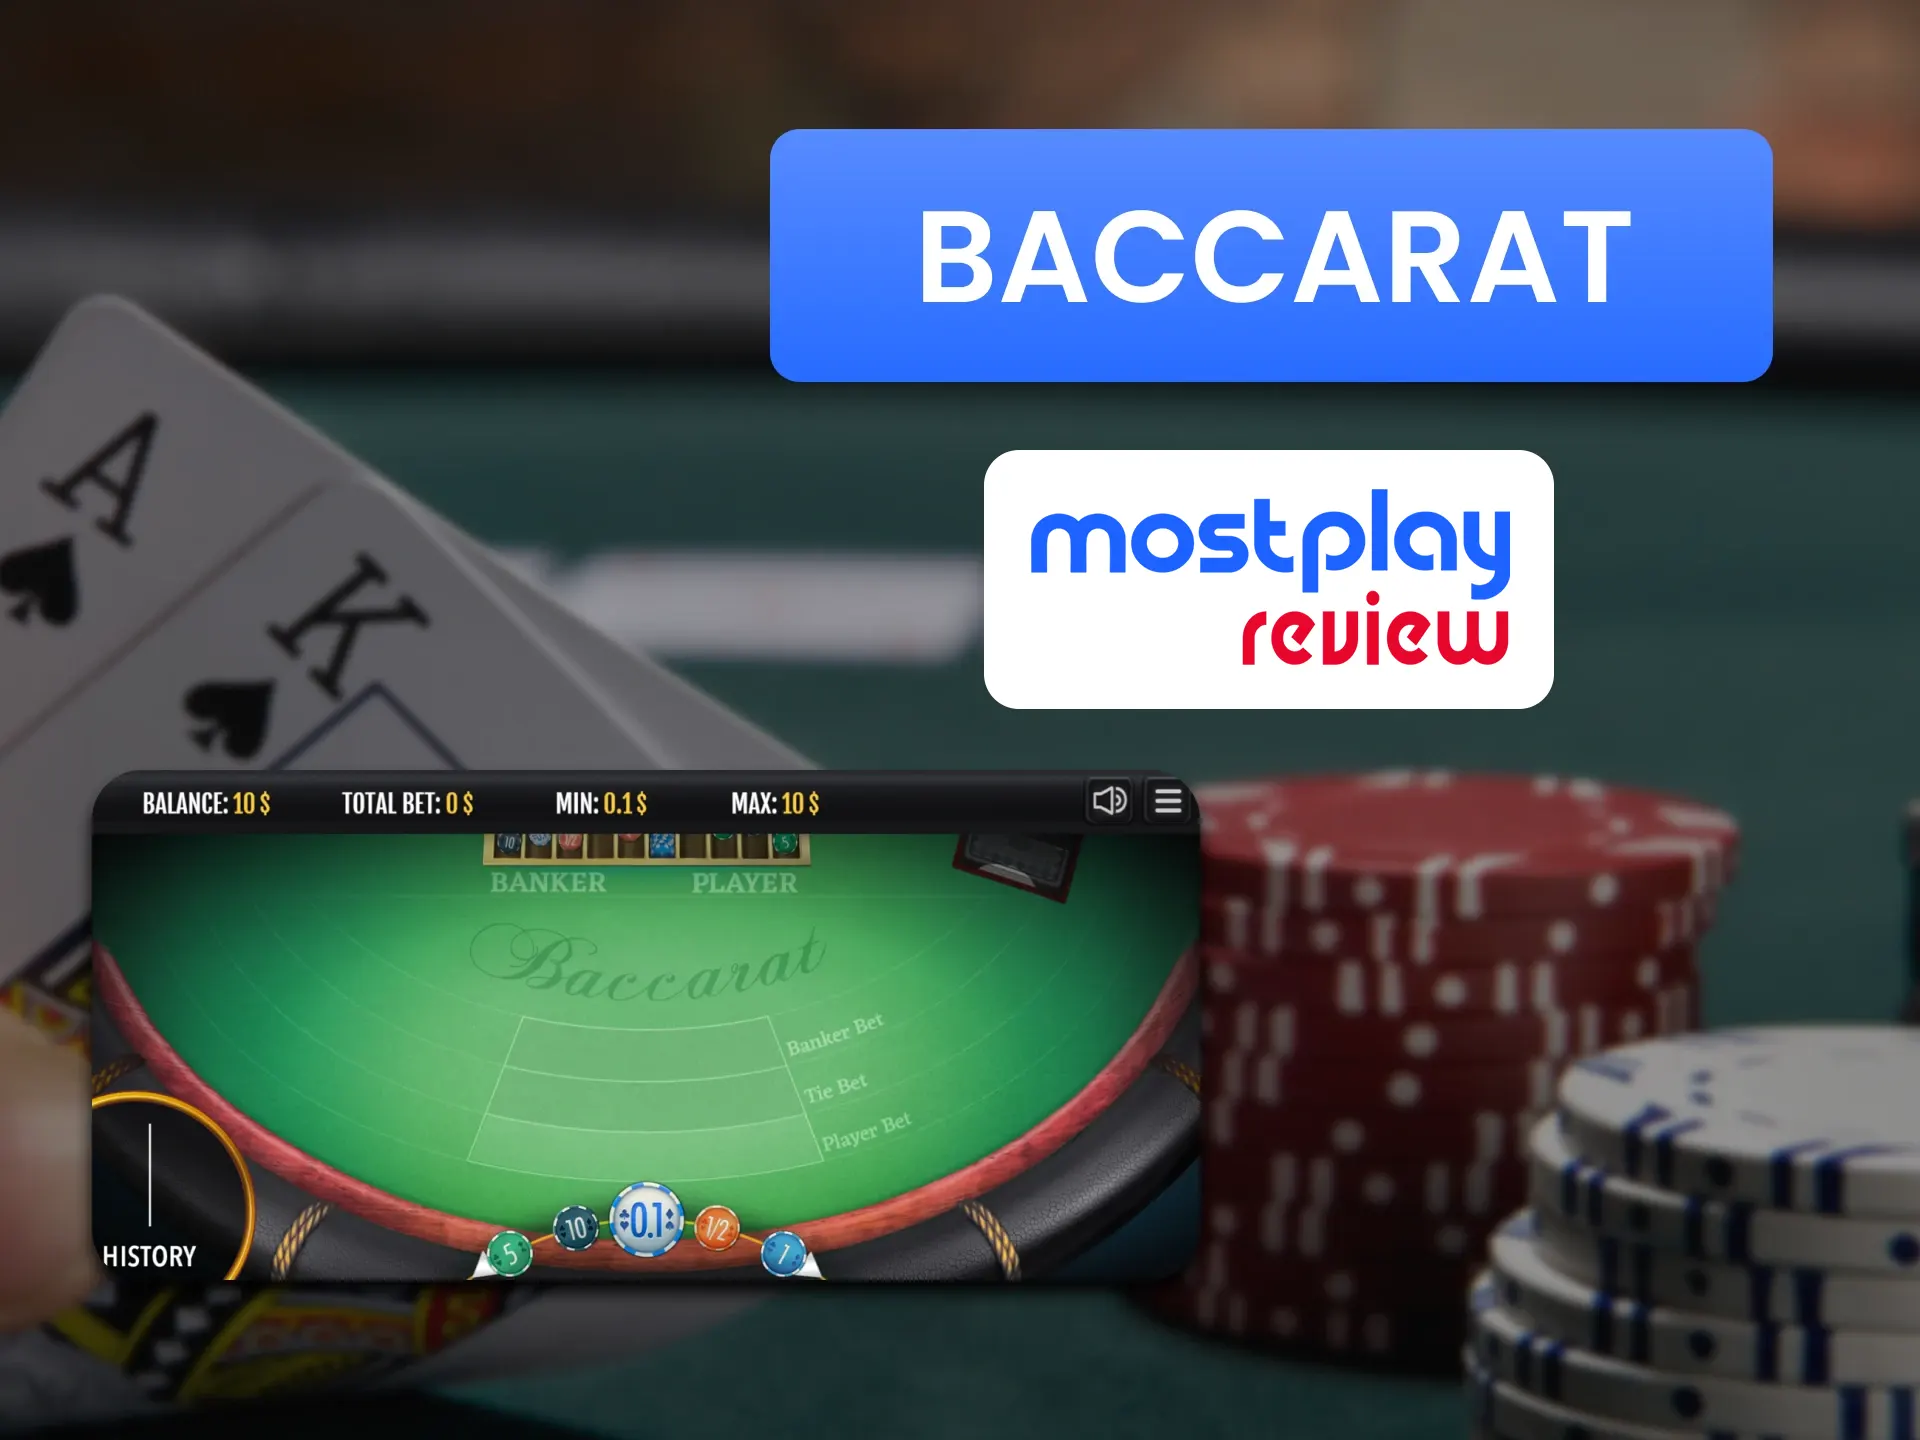 Choose baccarat for casino games at the Mostplay.